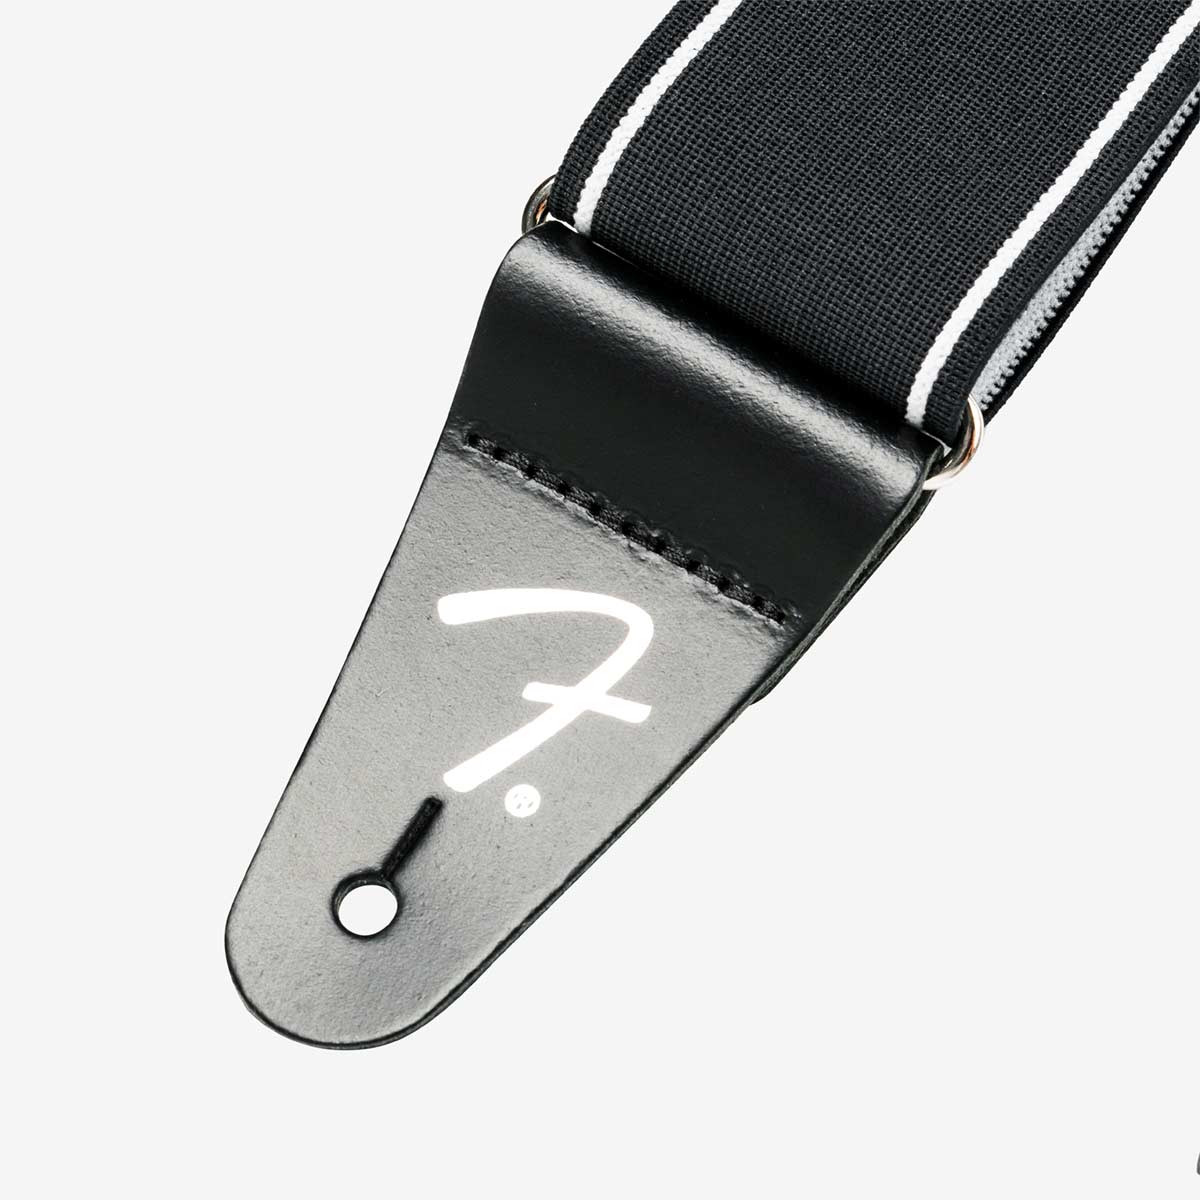 Fender x Hard Rock Weightless Guitar Strap in Black and White